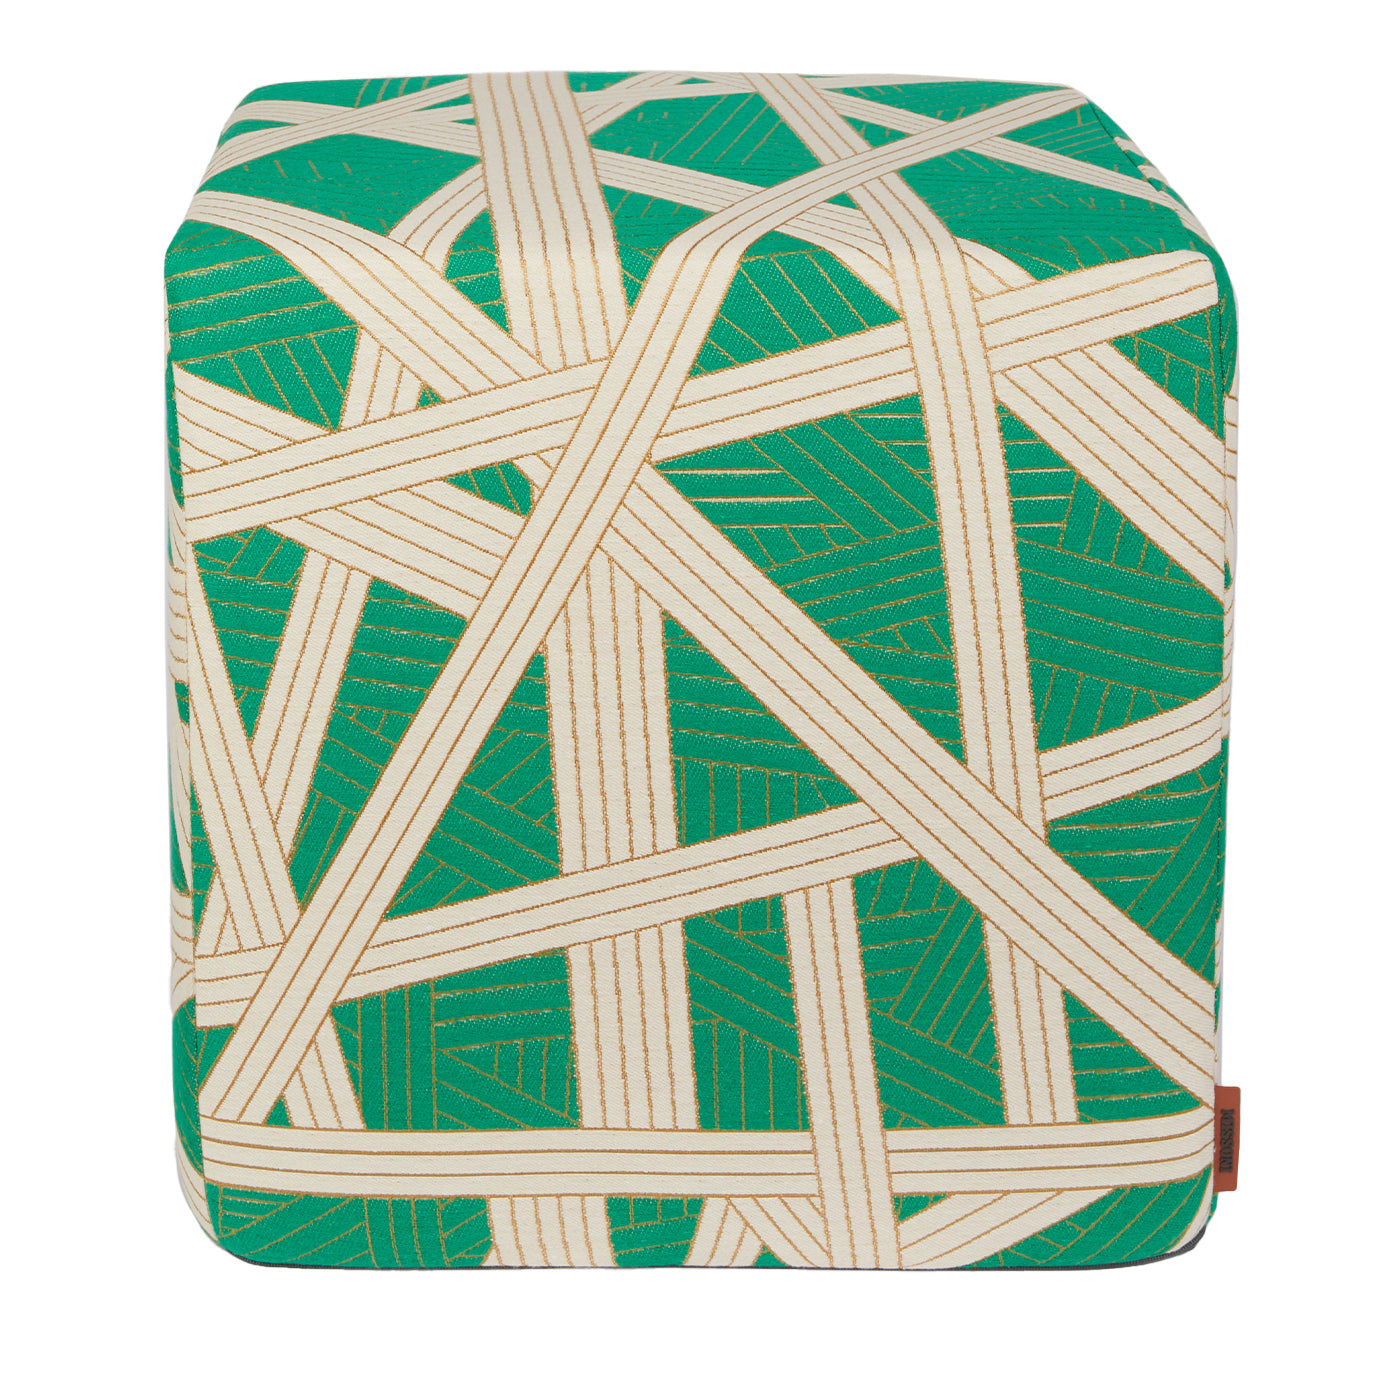 Nastri Cubic Gold and Green Stitching Pouf - Main view